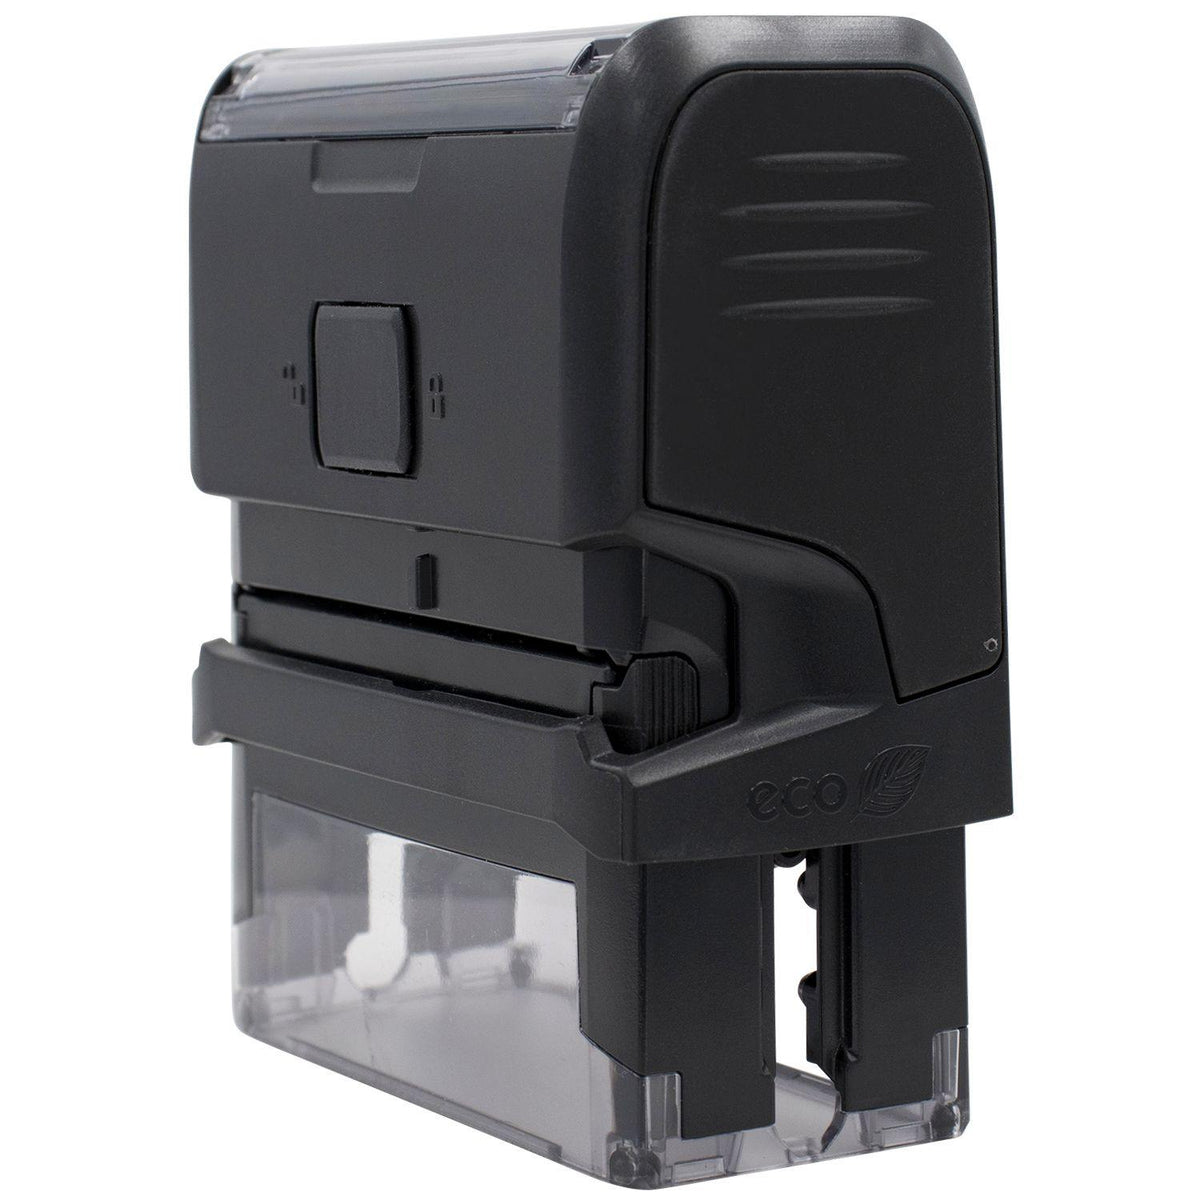 Self Inking Outline Self Inking Copy Stamp - Engineer Seal Stamps - Brand_Trodat, Impression Size_Small, Stamp Type_Self-Inking Stamp, Type of Use_General, Type of Use_Office